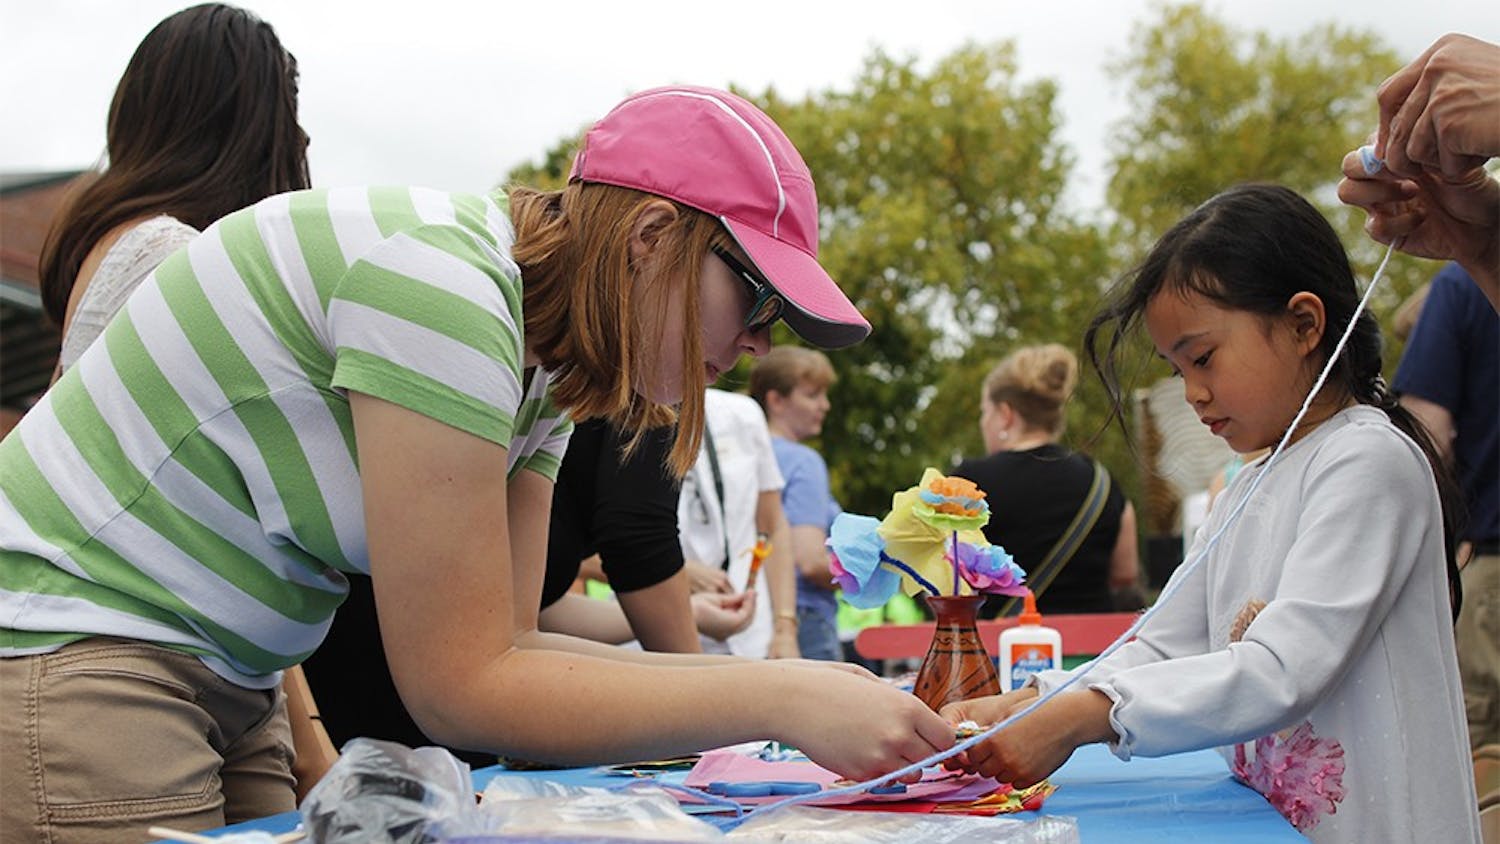 Mary Bolander, a volunteer with the Bloomington Sister Cities program helps Sasha Luhur, age 6, make a craft with yarn and popscicle sticks during the "Fiesta del Otoño" at Showers Plaza during the Farmer's Market Saturday.